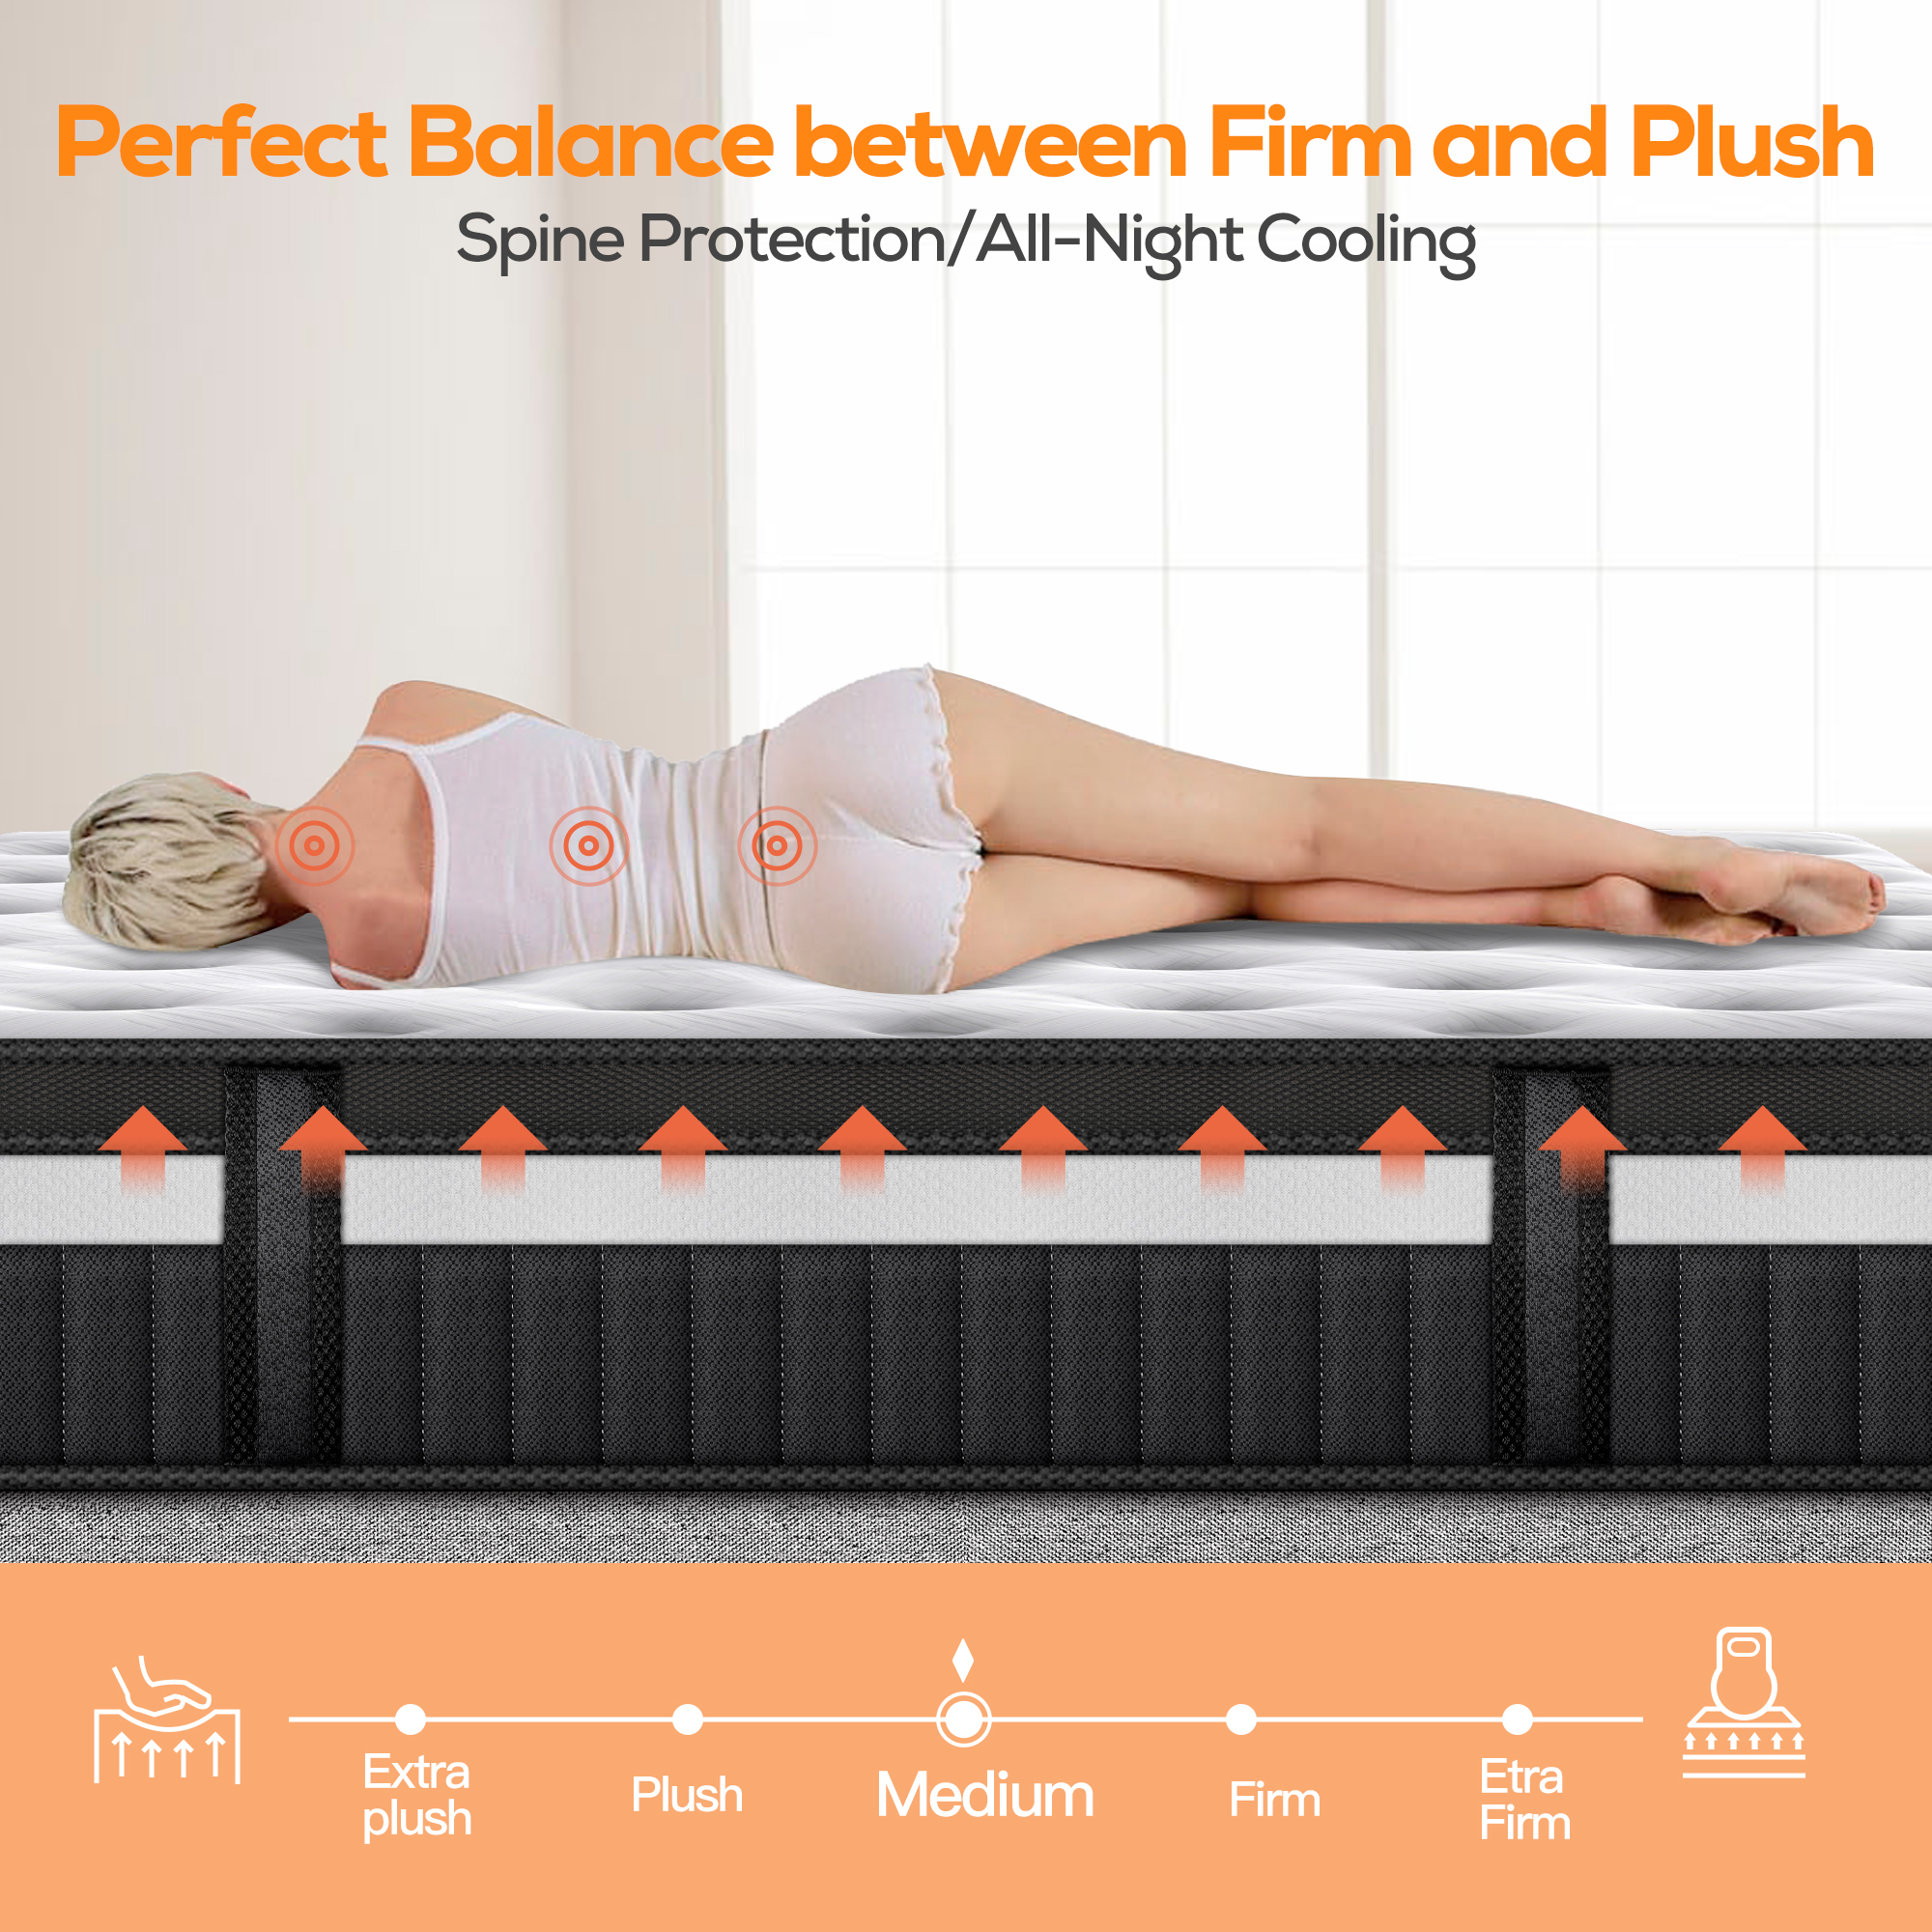 King Mattress, Famistar 13 Inch Memory Foam Mattress King Size, Innerspring Hybrid King Bed Mattress in a Box Medium Firm with Motion Isolation & Strong Support & Pressure Relief, CertiPUR-US - image 2 of 13